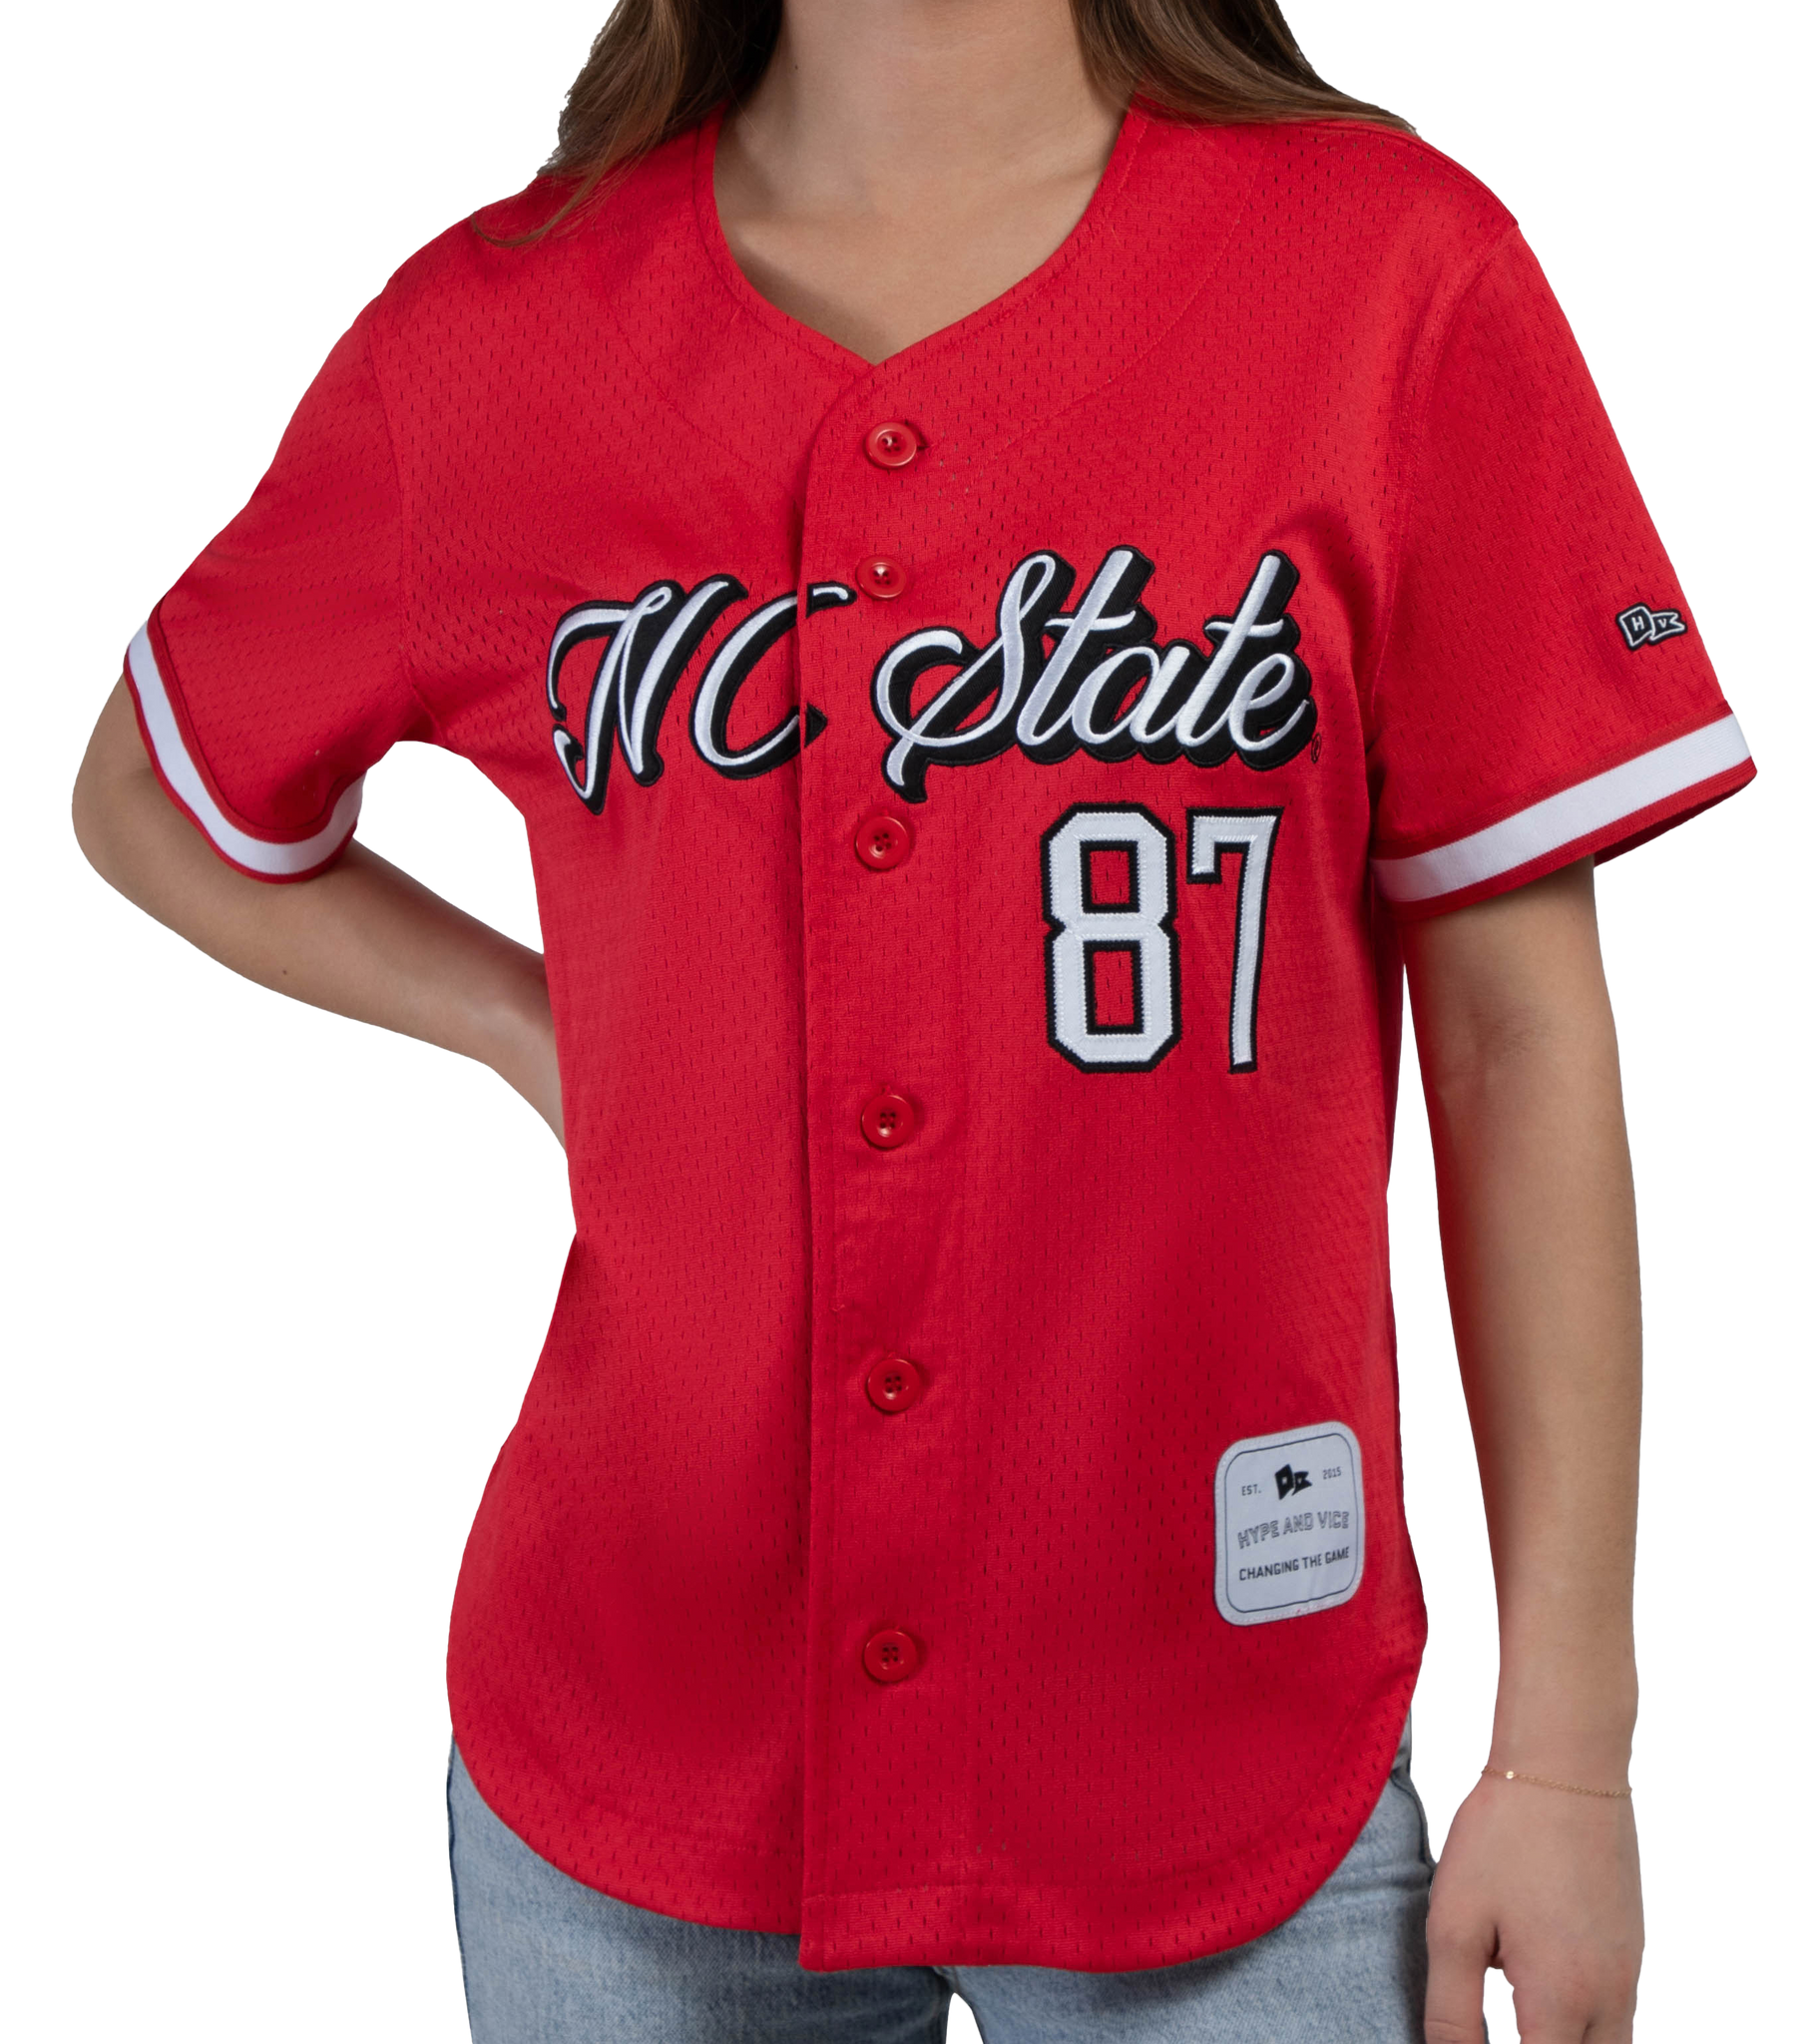 NC State Wolfpack Hype and Vice Women's Red Baseball Jersey